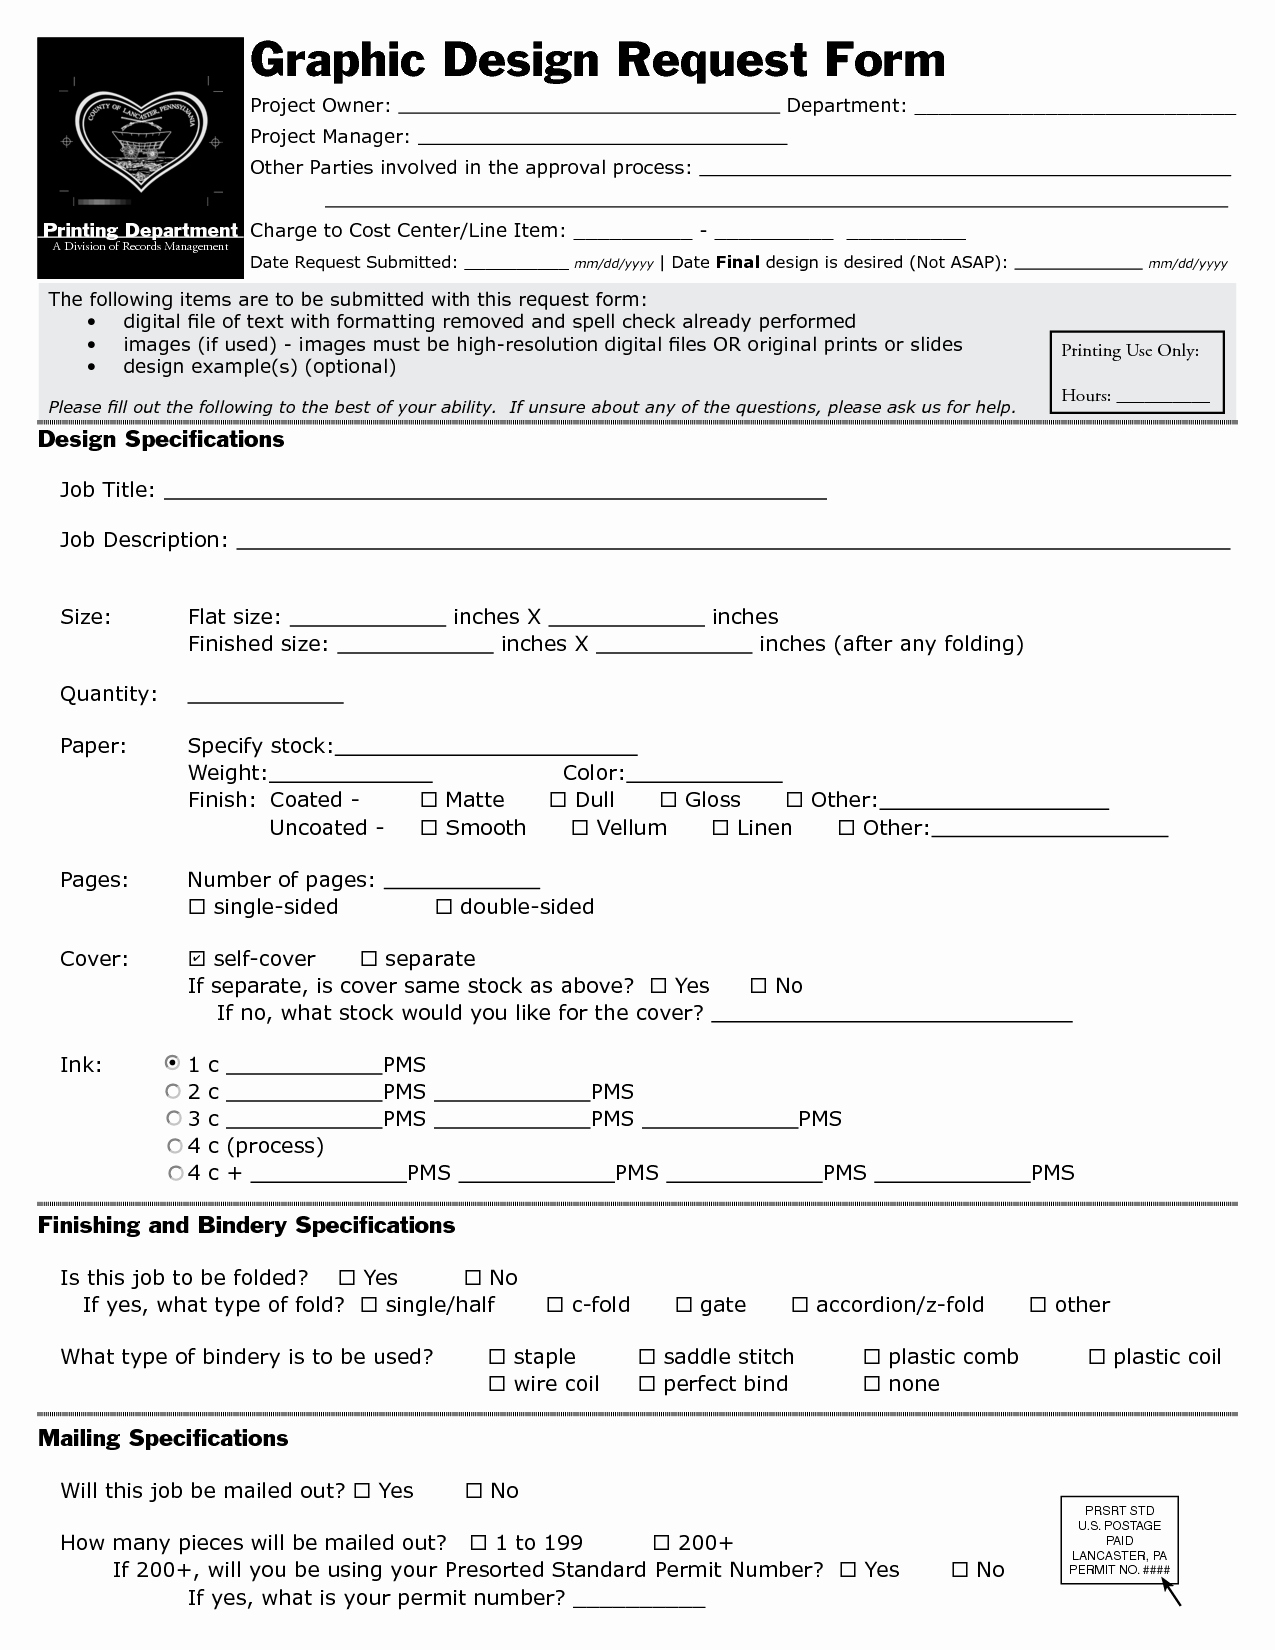 Graphic Design Project Request form Luxury Graphic Design Request form Template